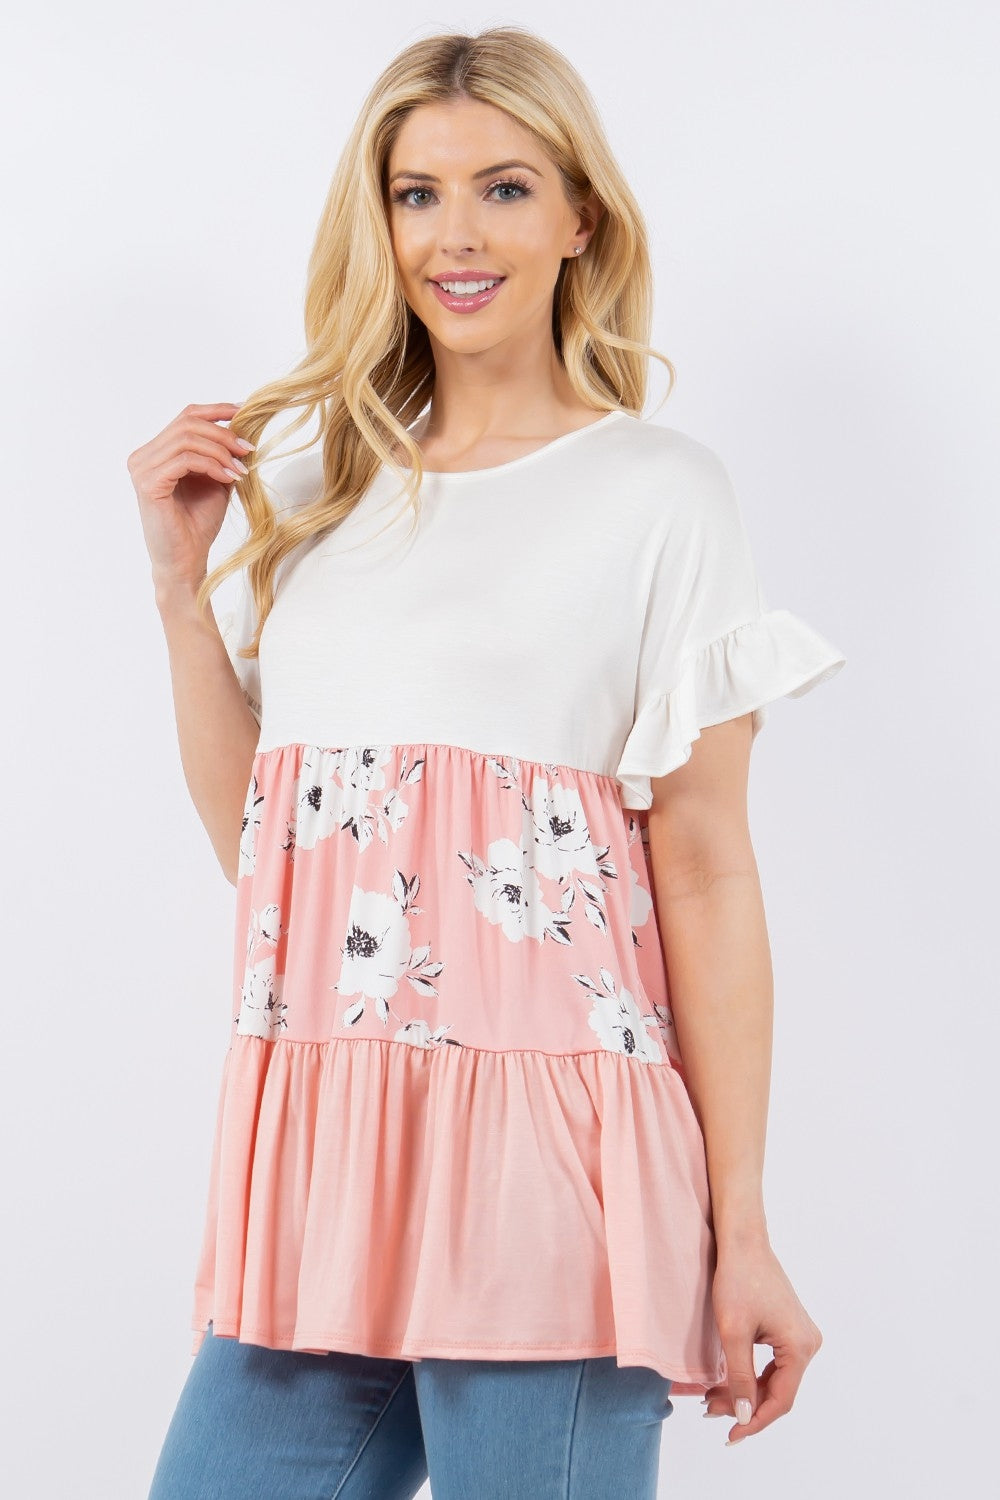 Celeste Full Size Floral Color Block Ruffled Short Sleeve Top - Tigbuls Variety Fashion